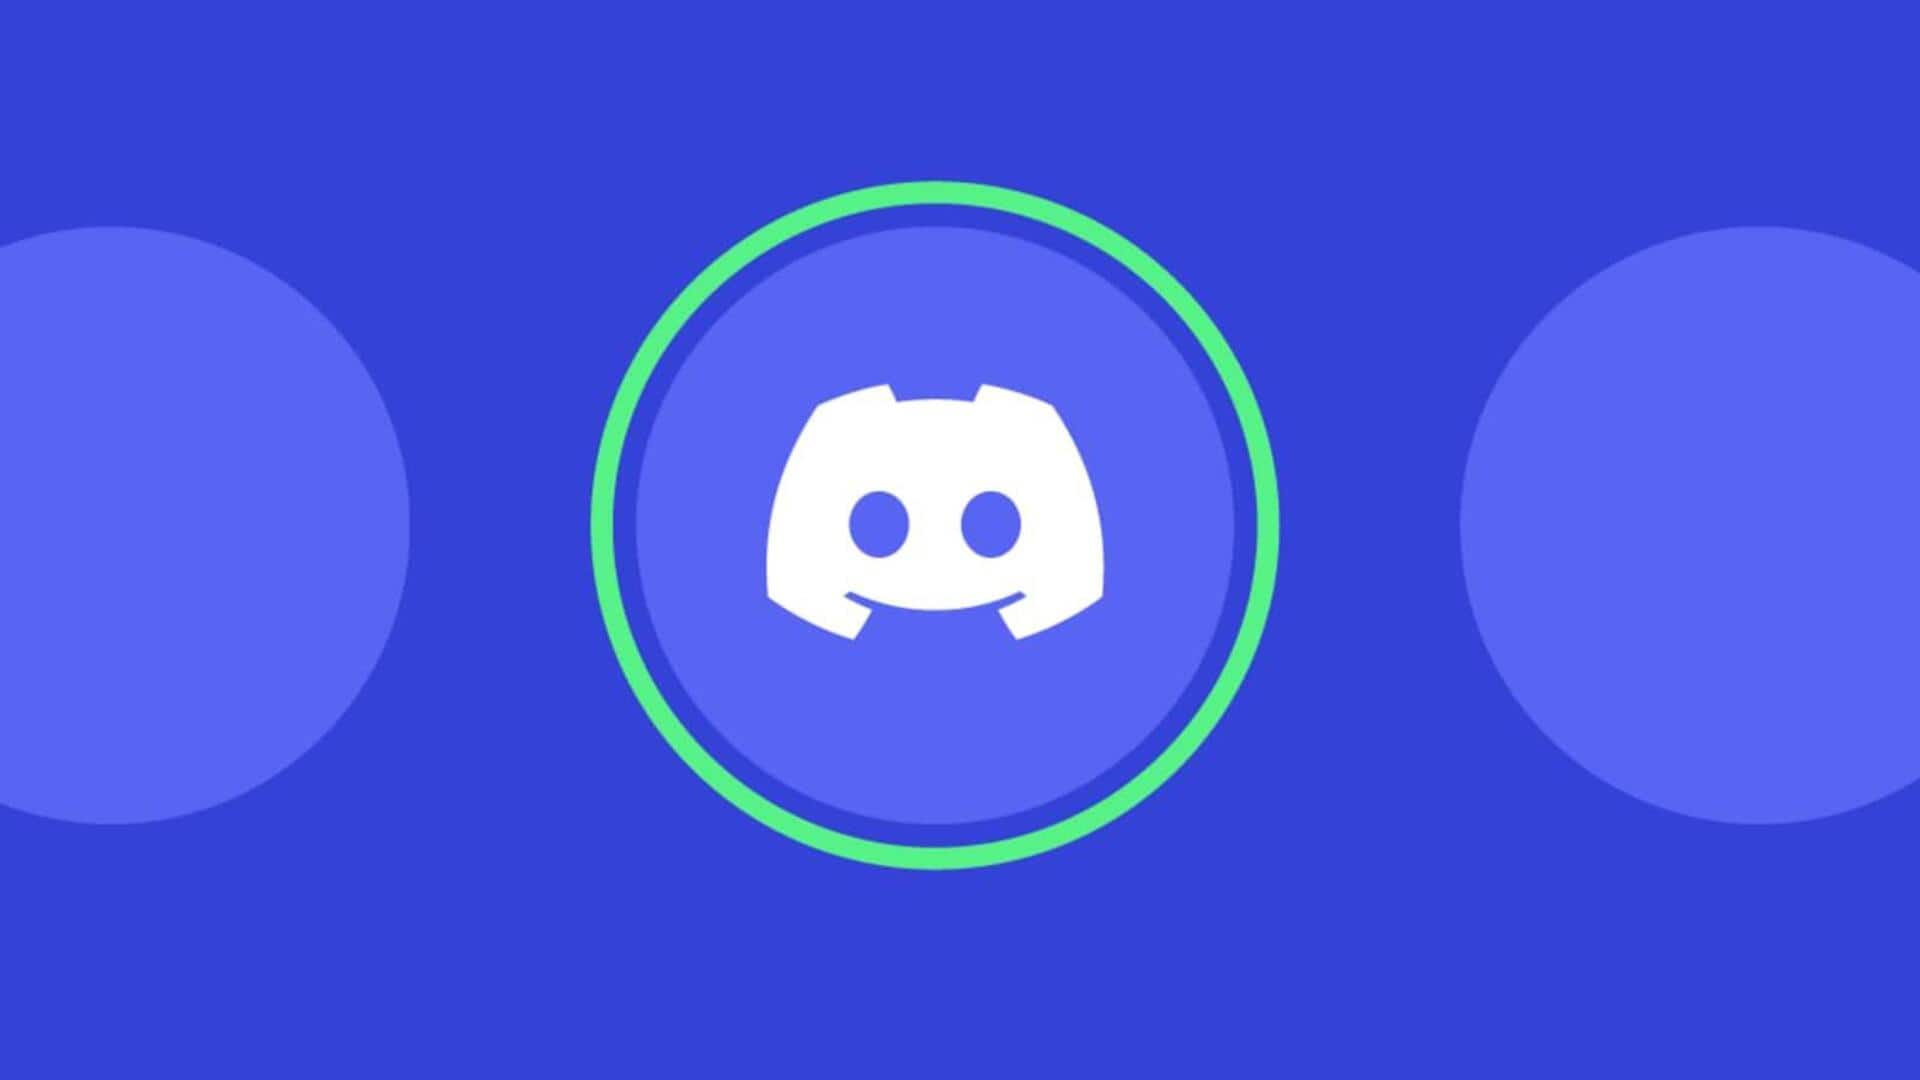 Your Discord messages are being sold online